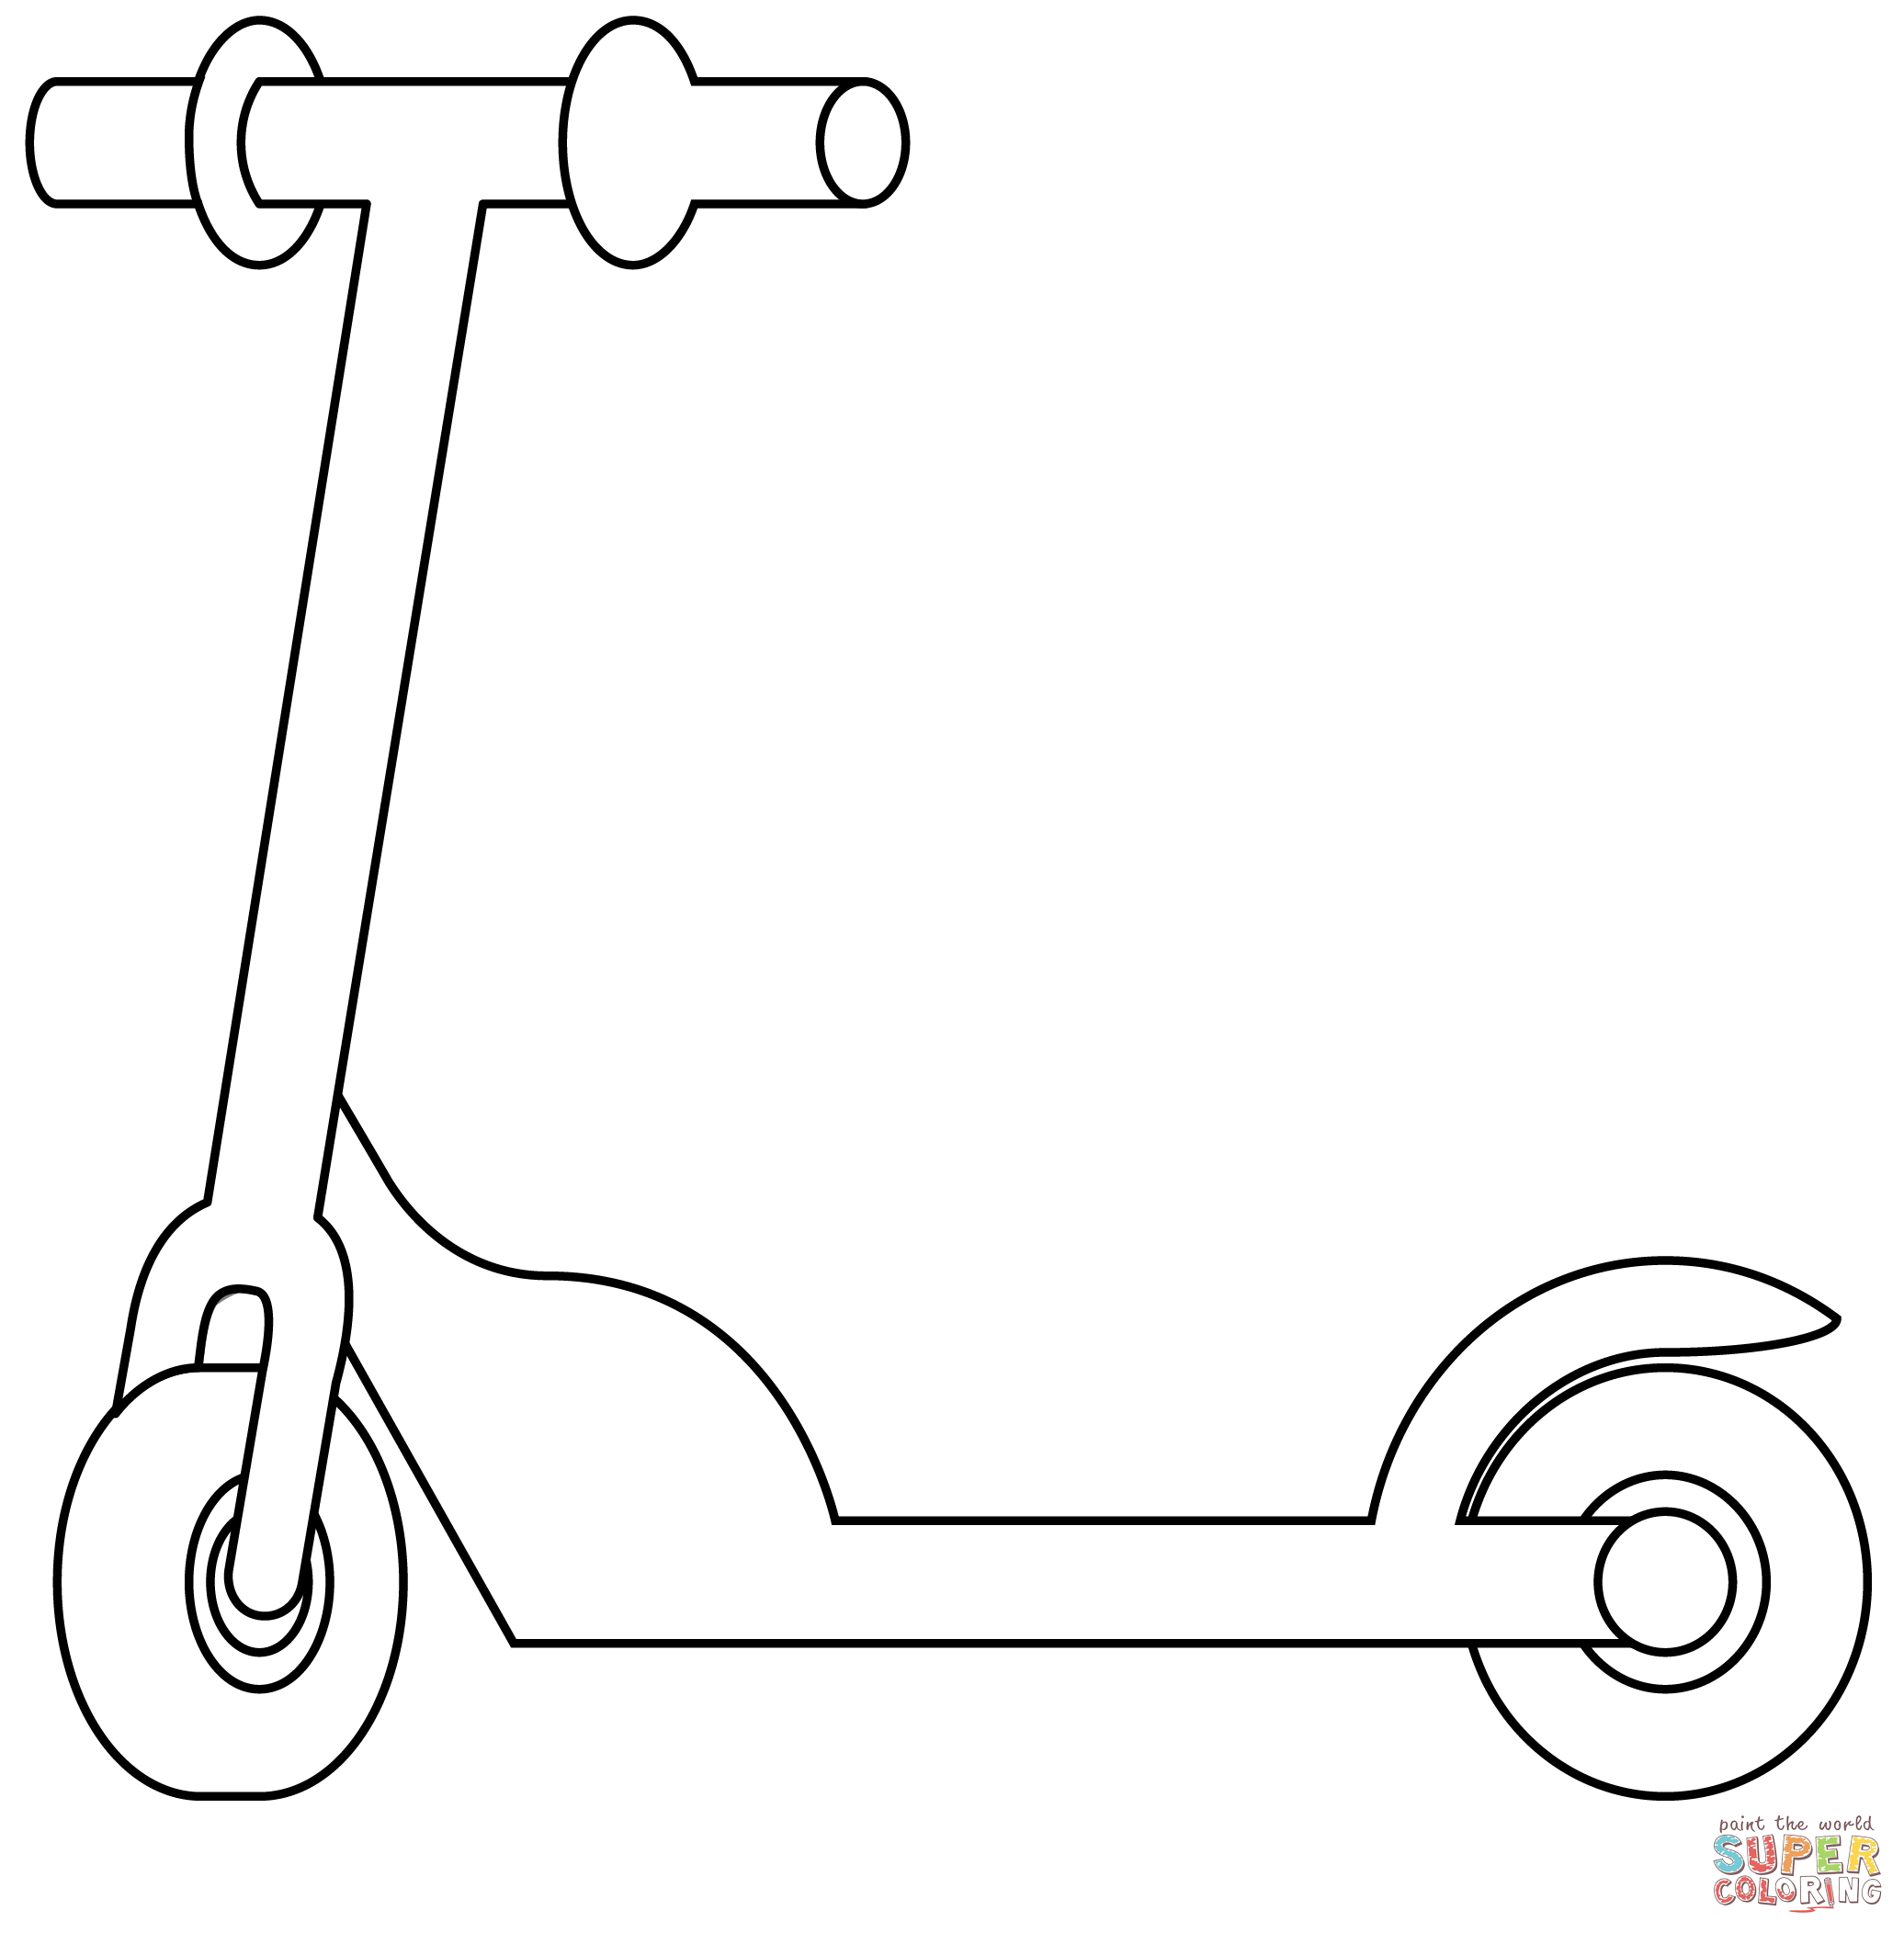 Kick scooter coloring page free printable coloring pages